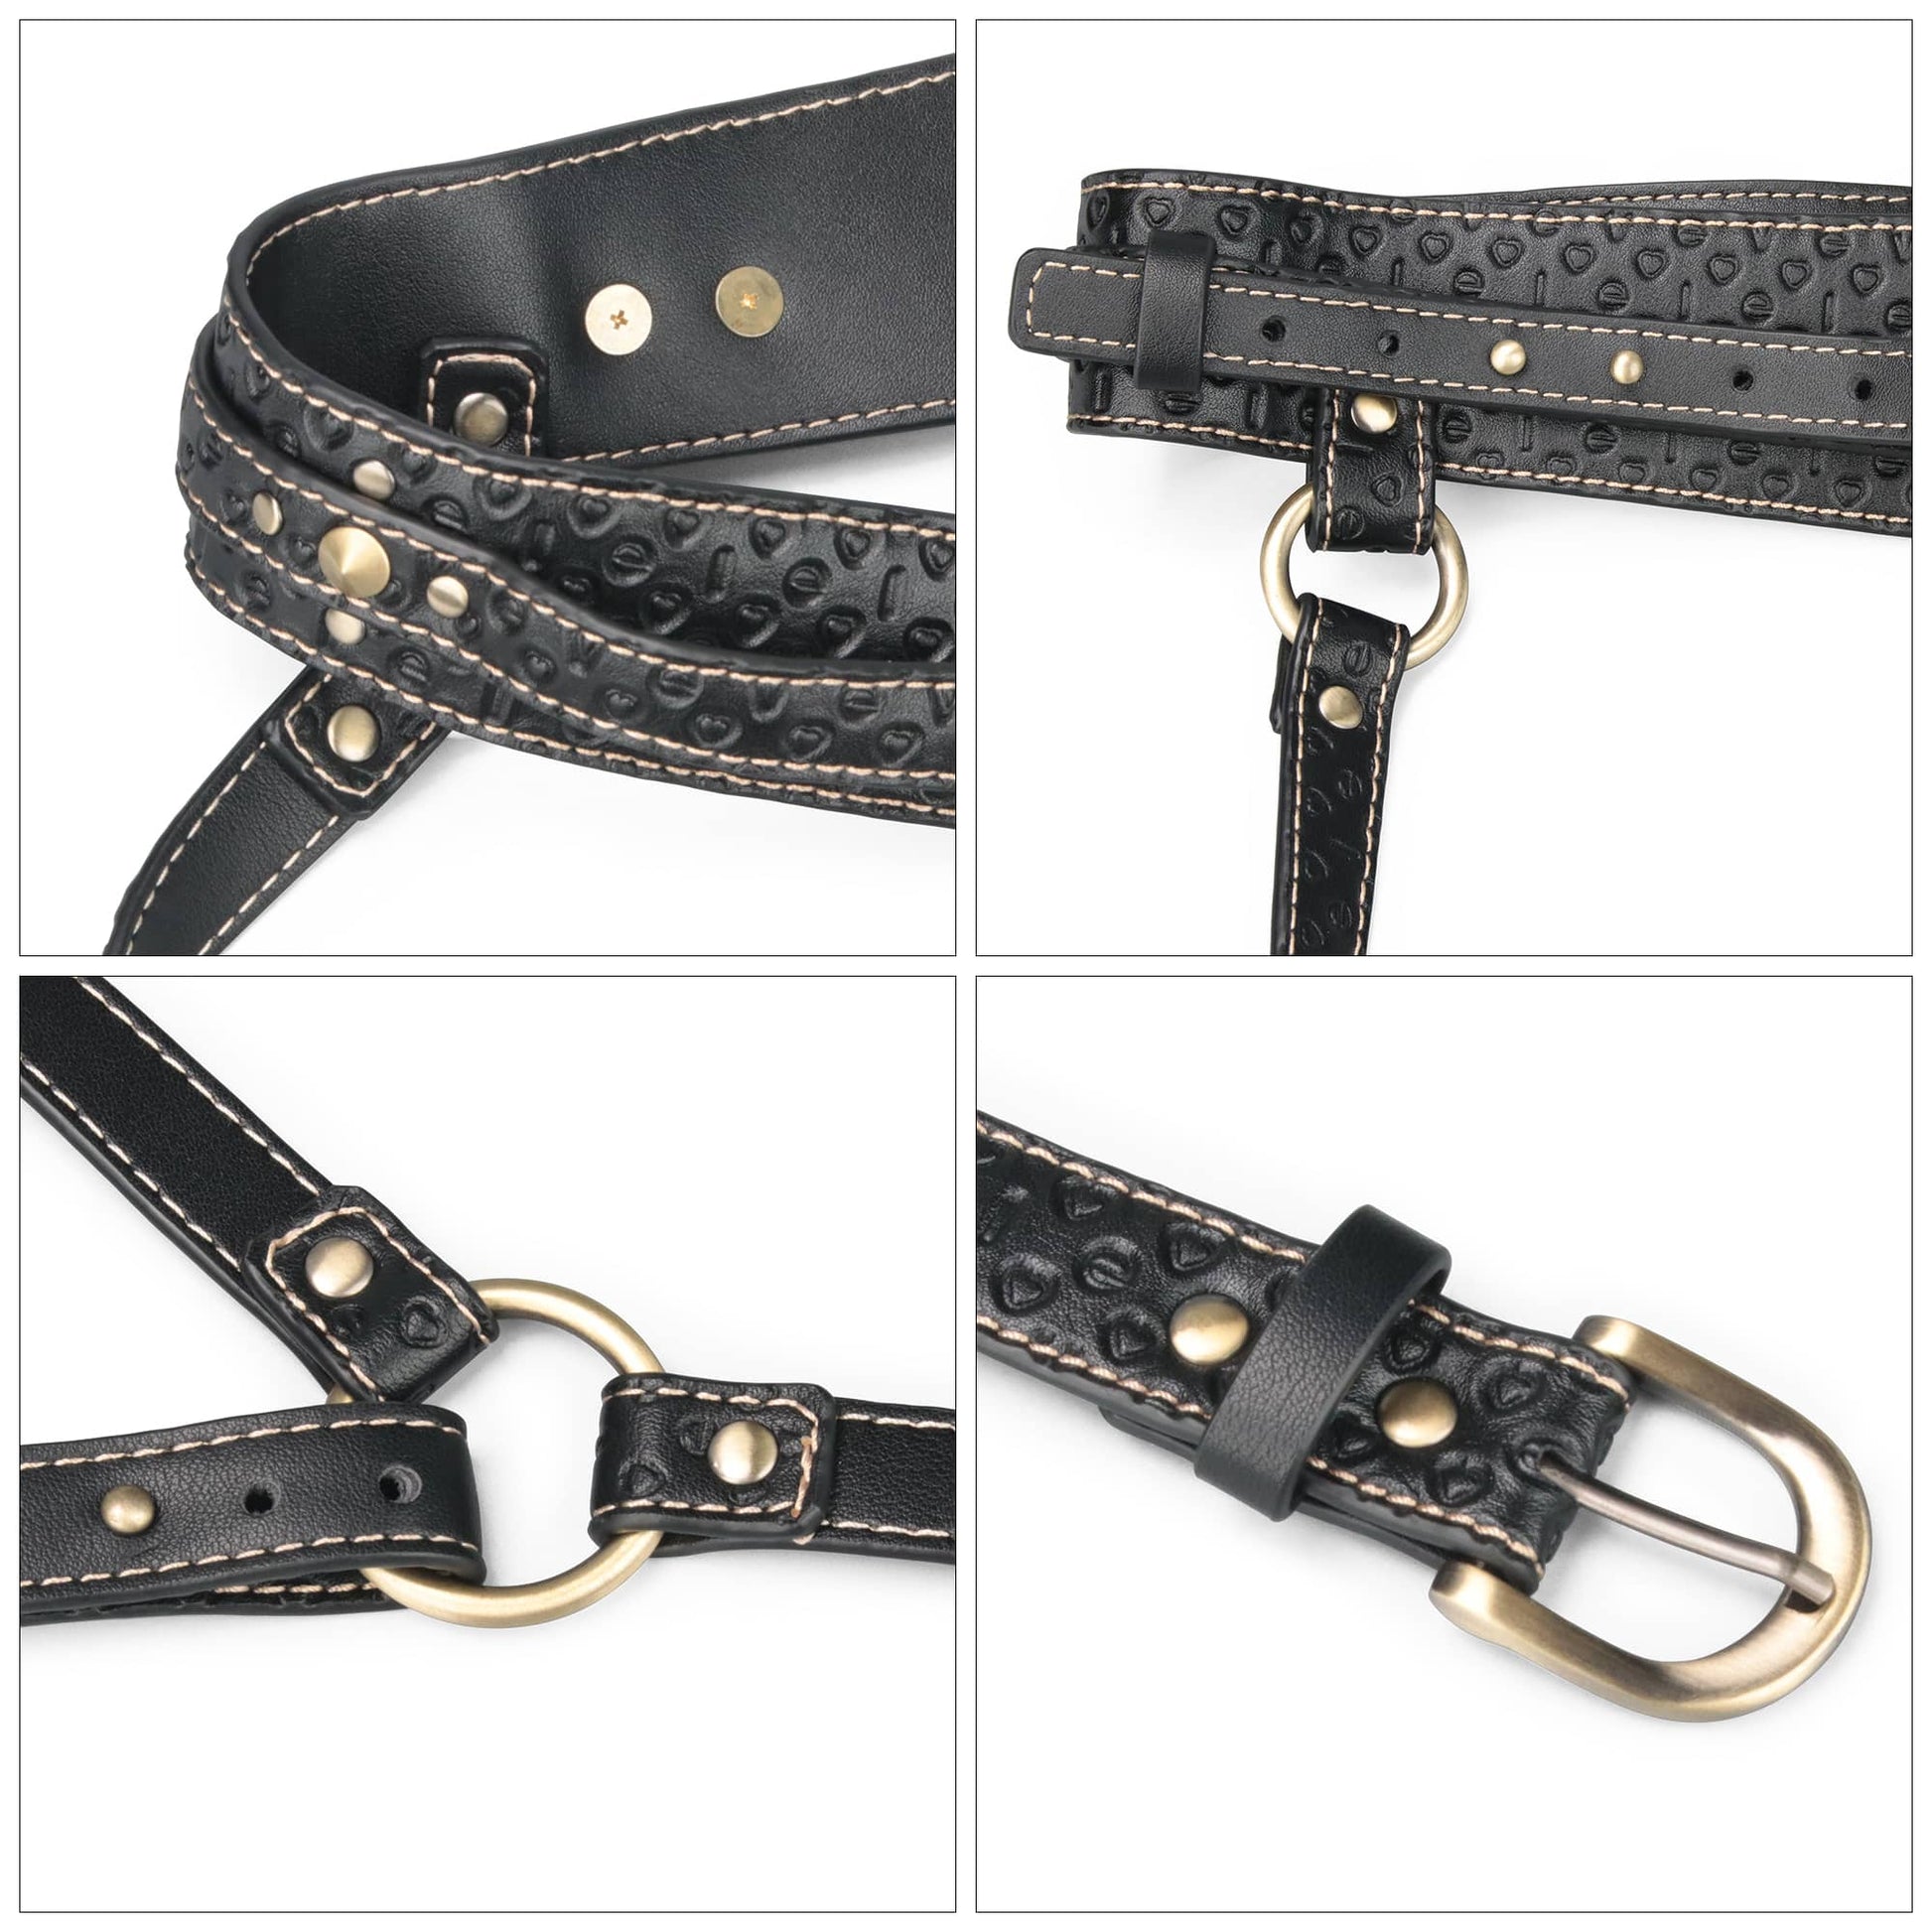 The rebellion reign full body harness is crafted from durable PU with punk-inspired antique-bronze rivets